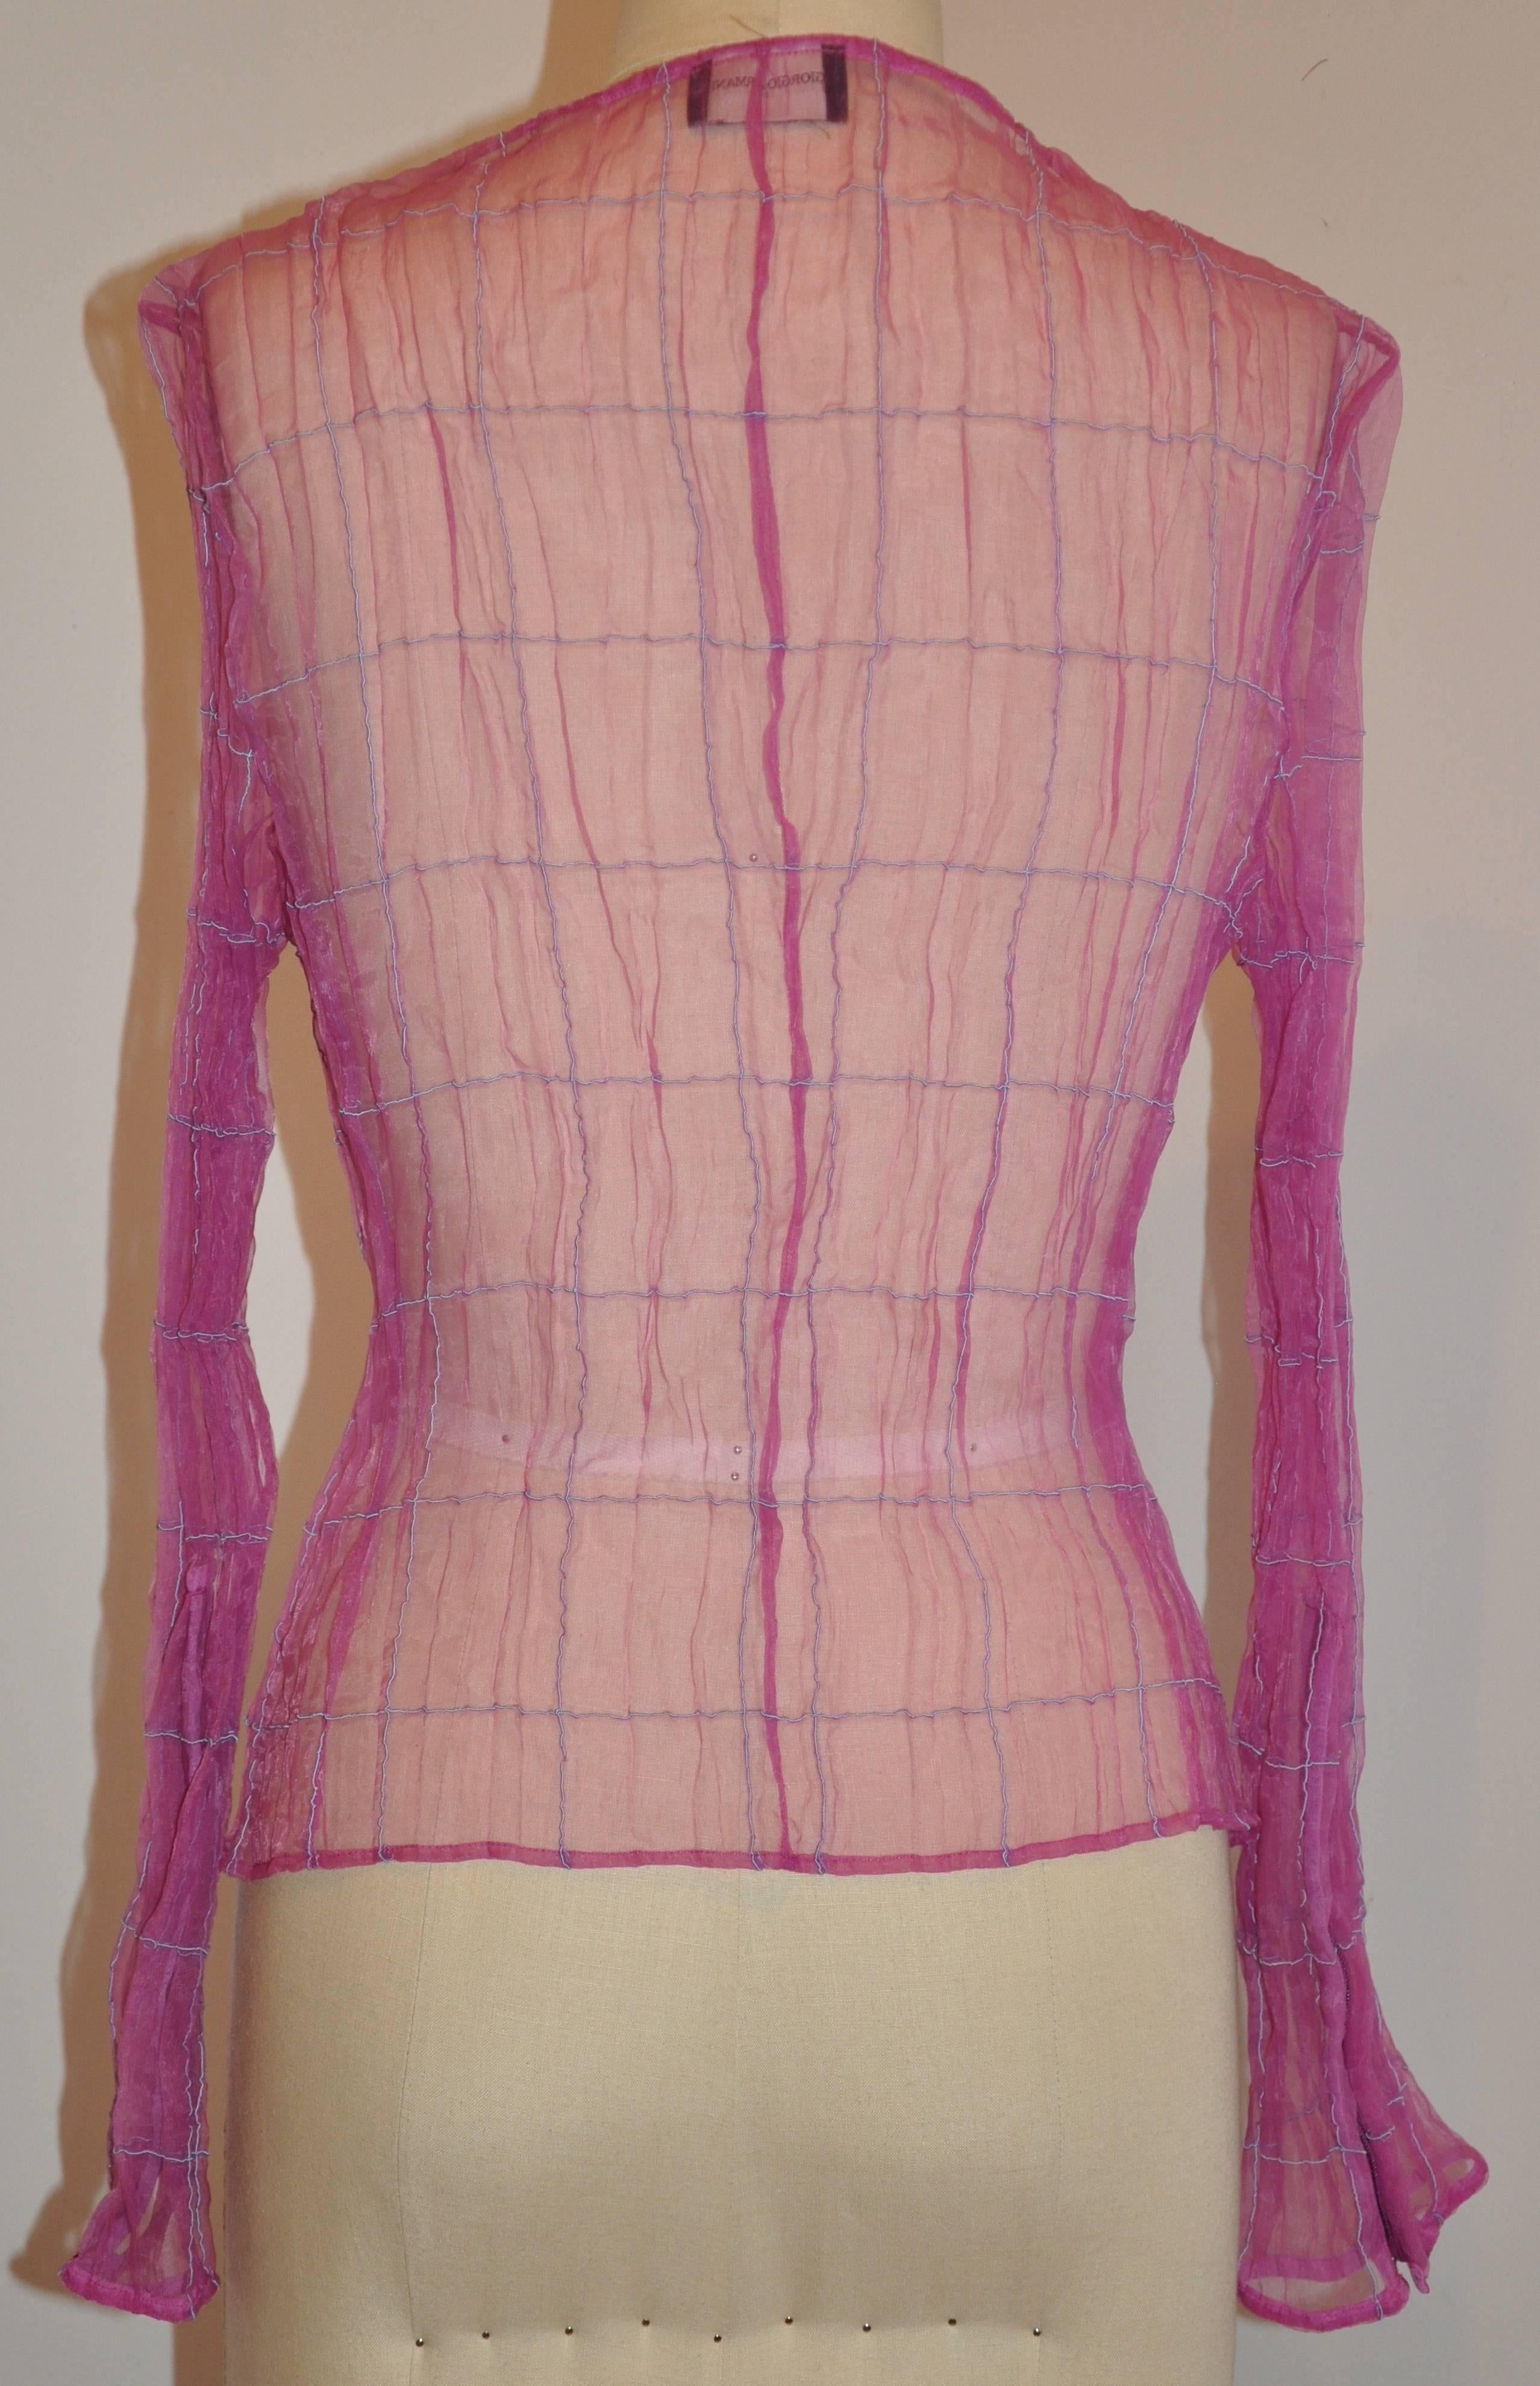        Georgio Armani's wonderful sheer fuchsia zippered top is accented with micro silk lavender cord woven within the sheer fuchsia. The sleeves are detailed with a 7